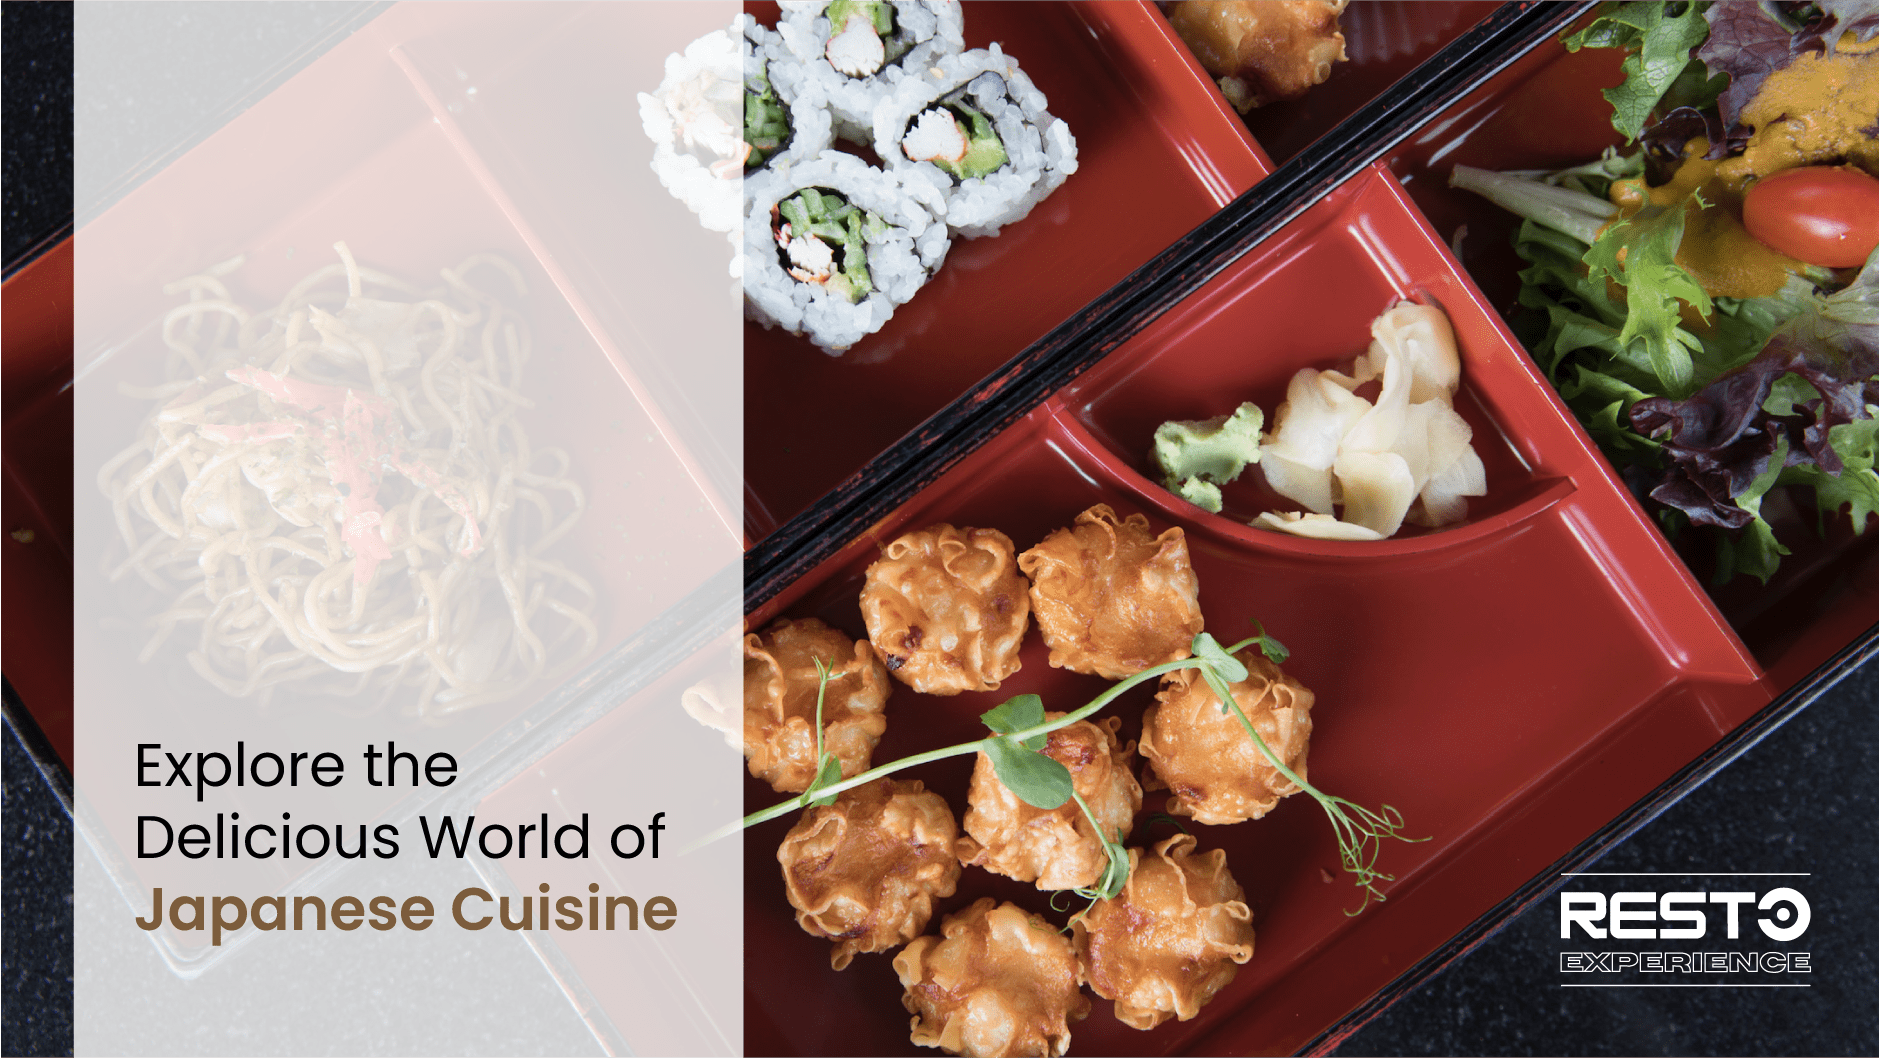 Explore the Delicious World of Japanese Cuisine